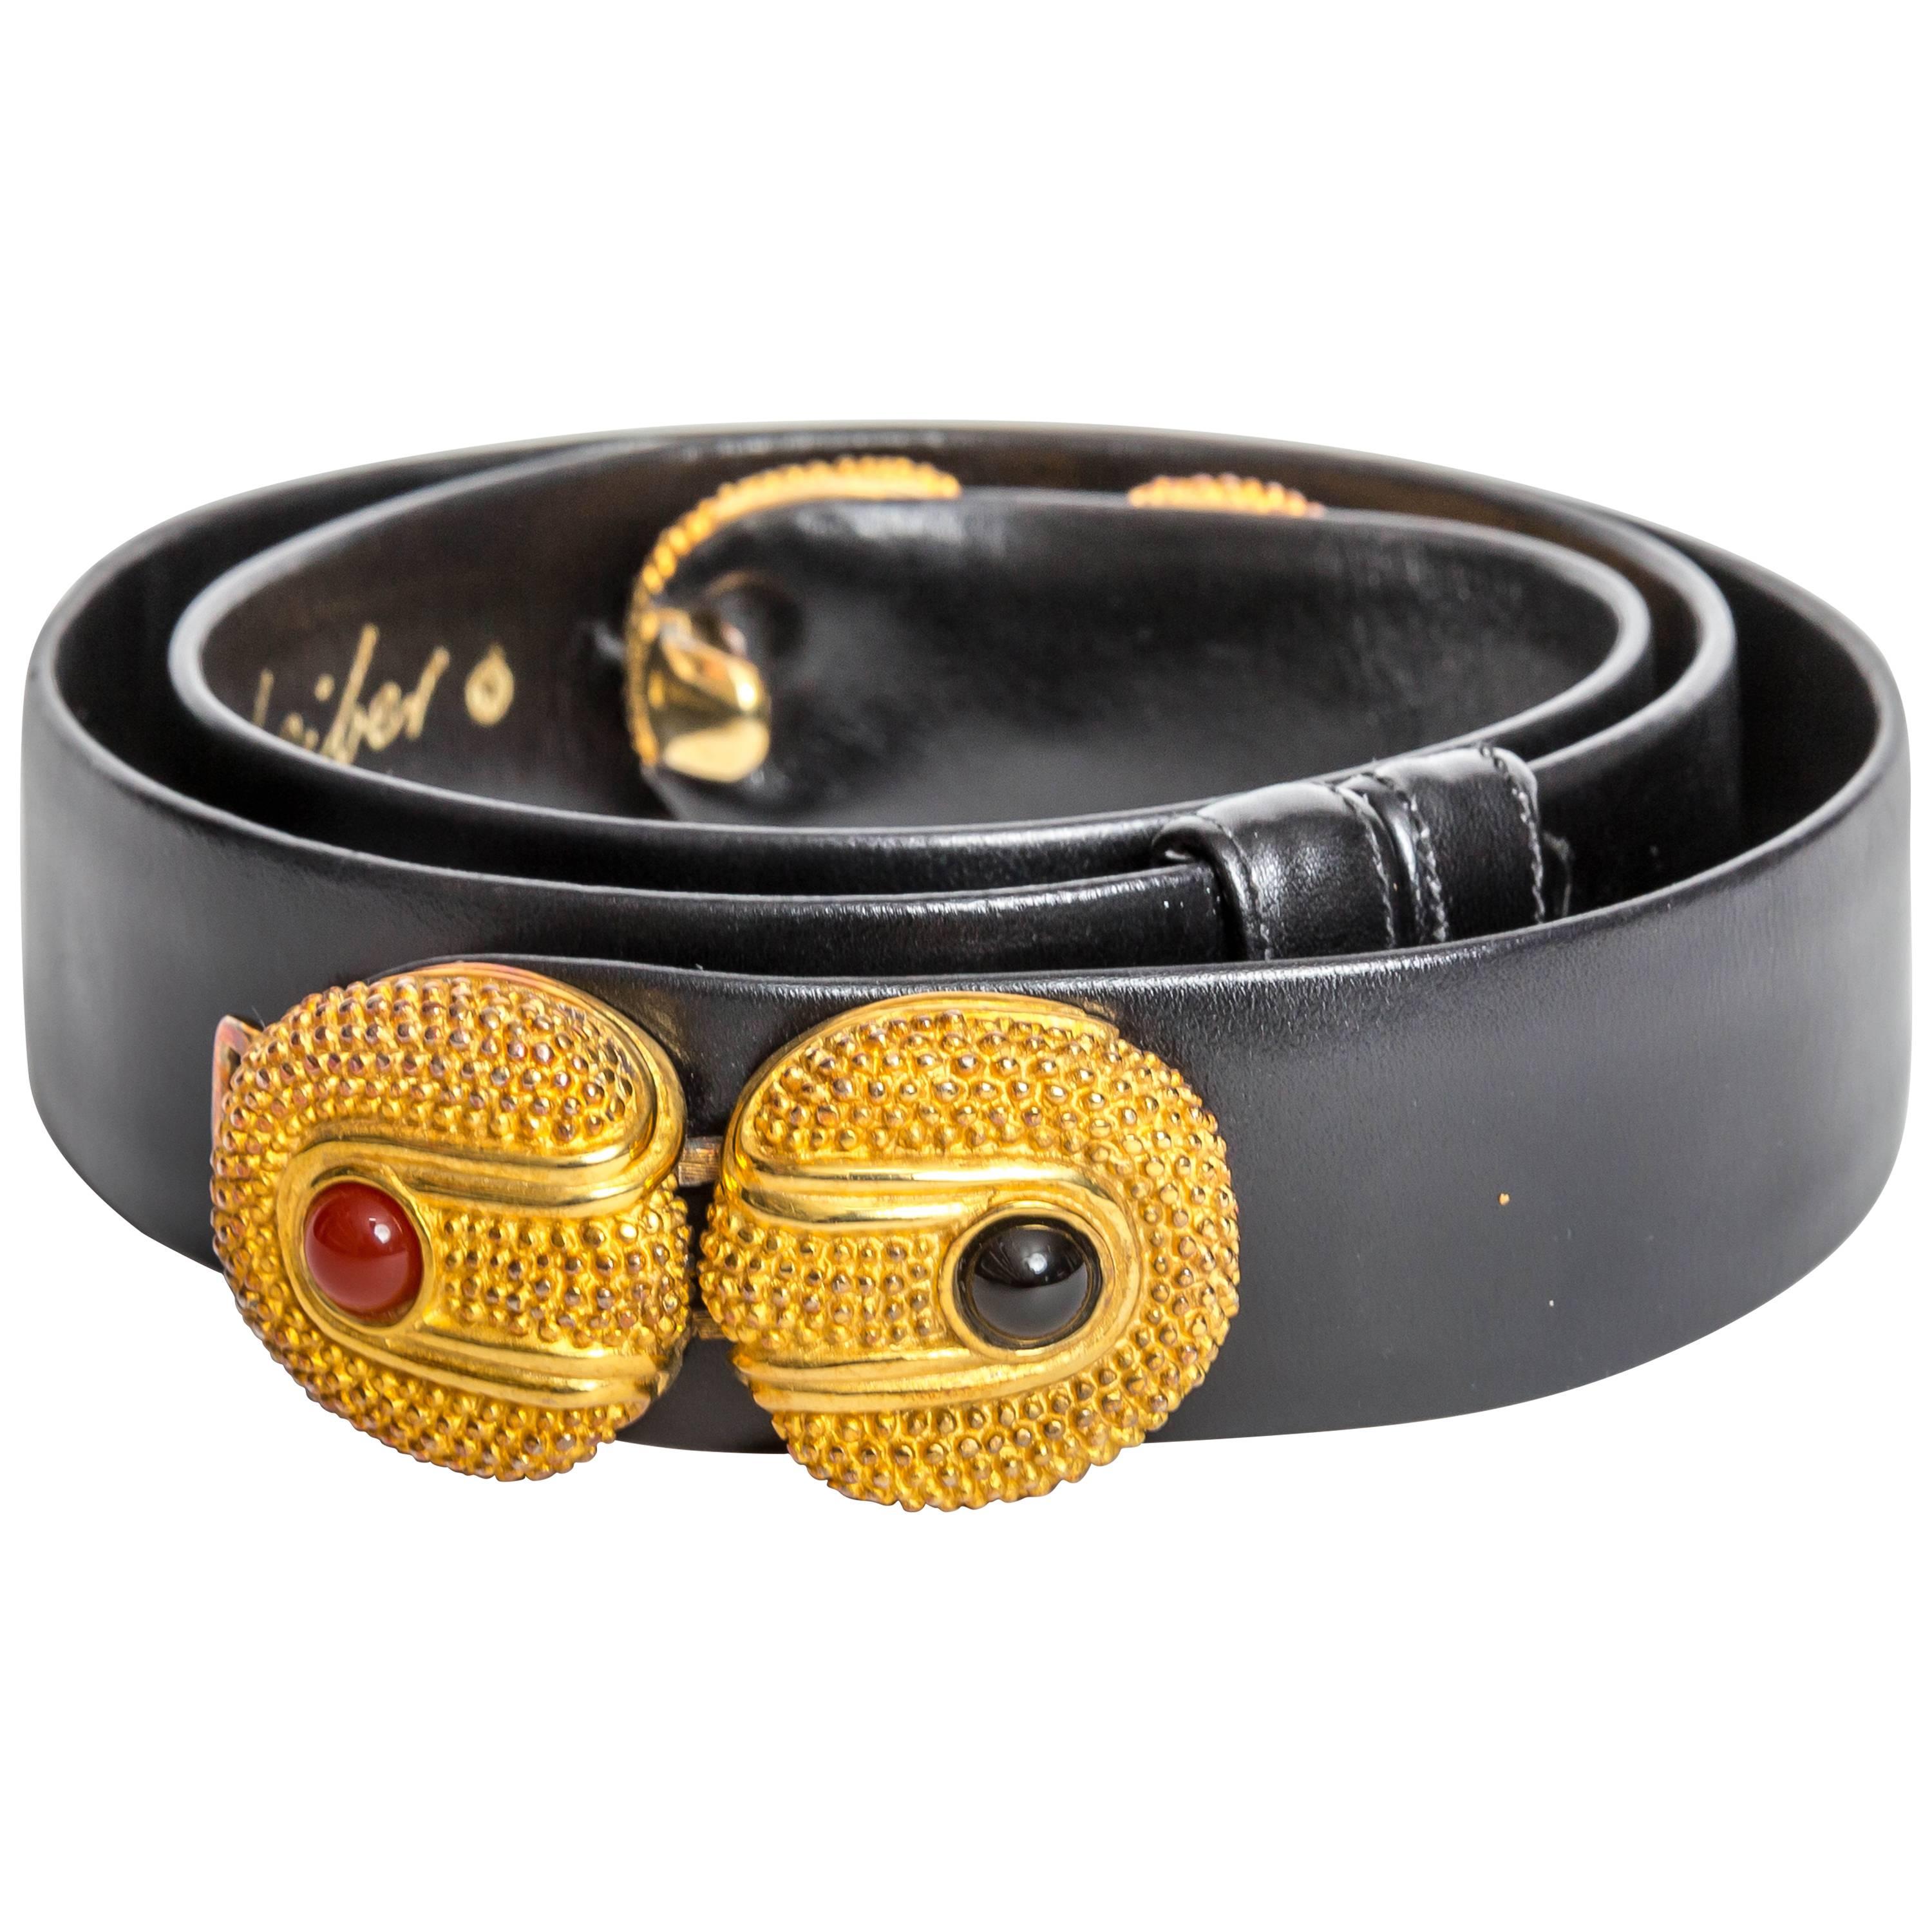 Judith Leiber Black Leather Belt with Semi Precious Cabochons